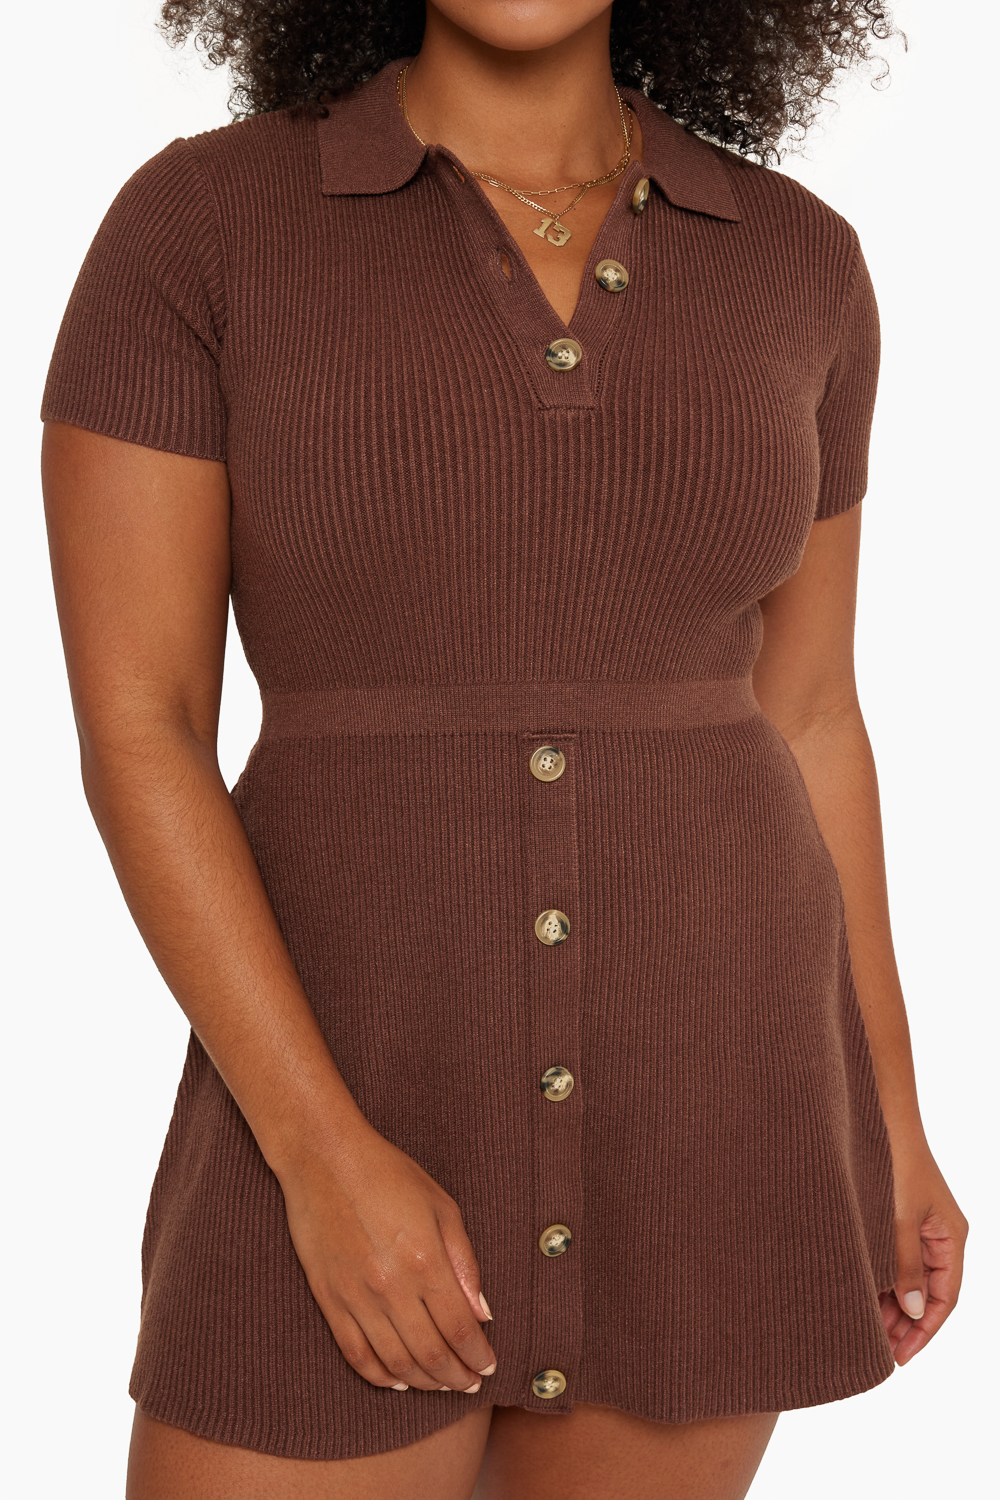 SET™ POLO KNIT DRESS IN CHOCOLATE